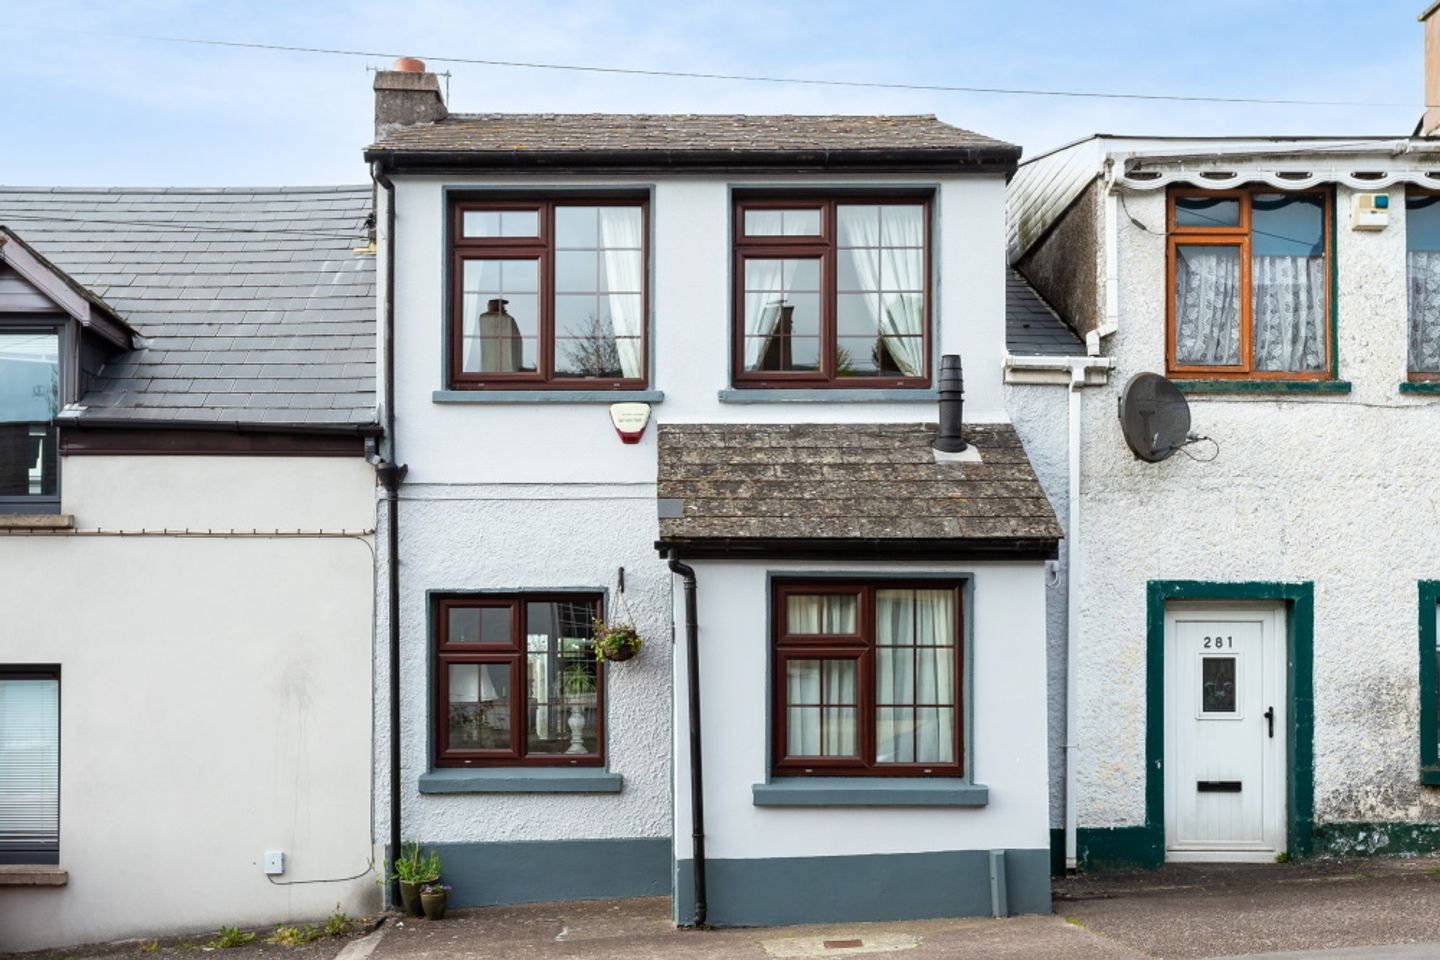 280 Old Youghal Road, Dillons Cross, Co. Cork